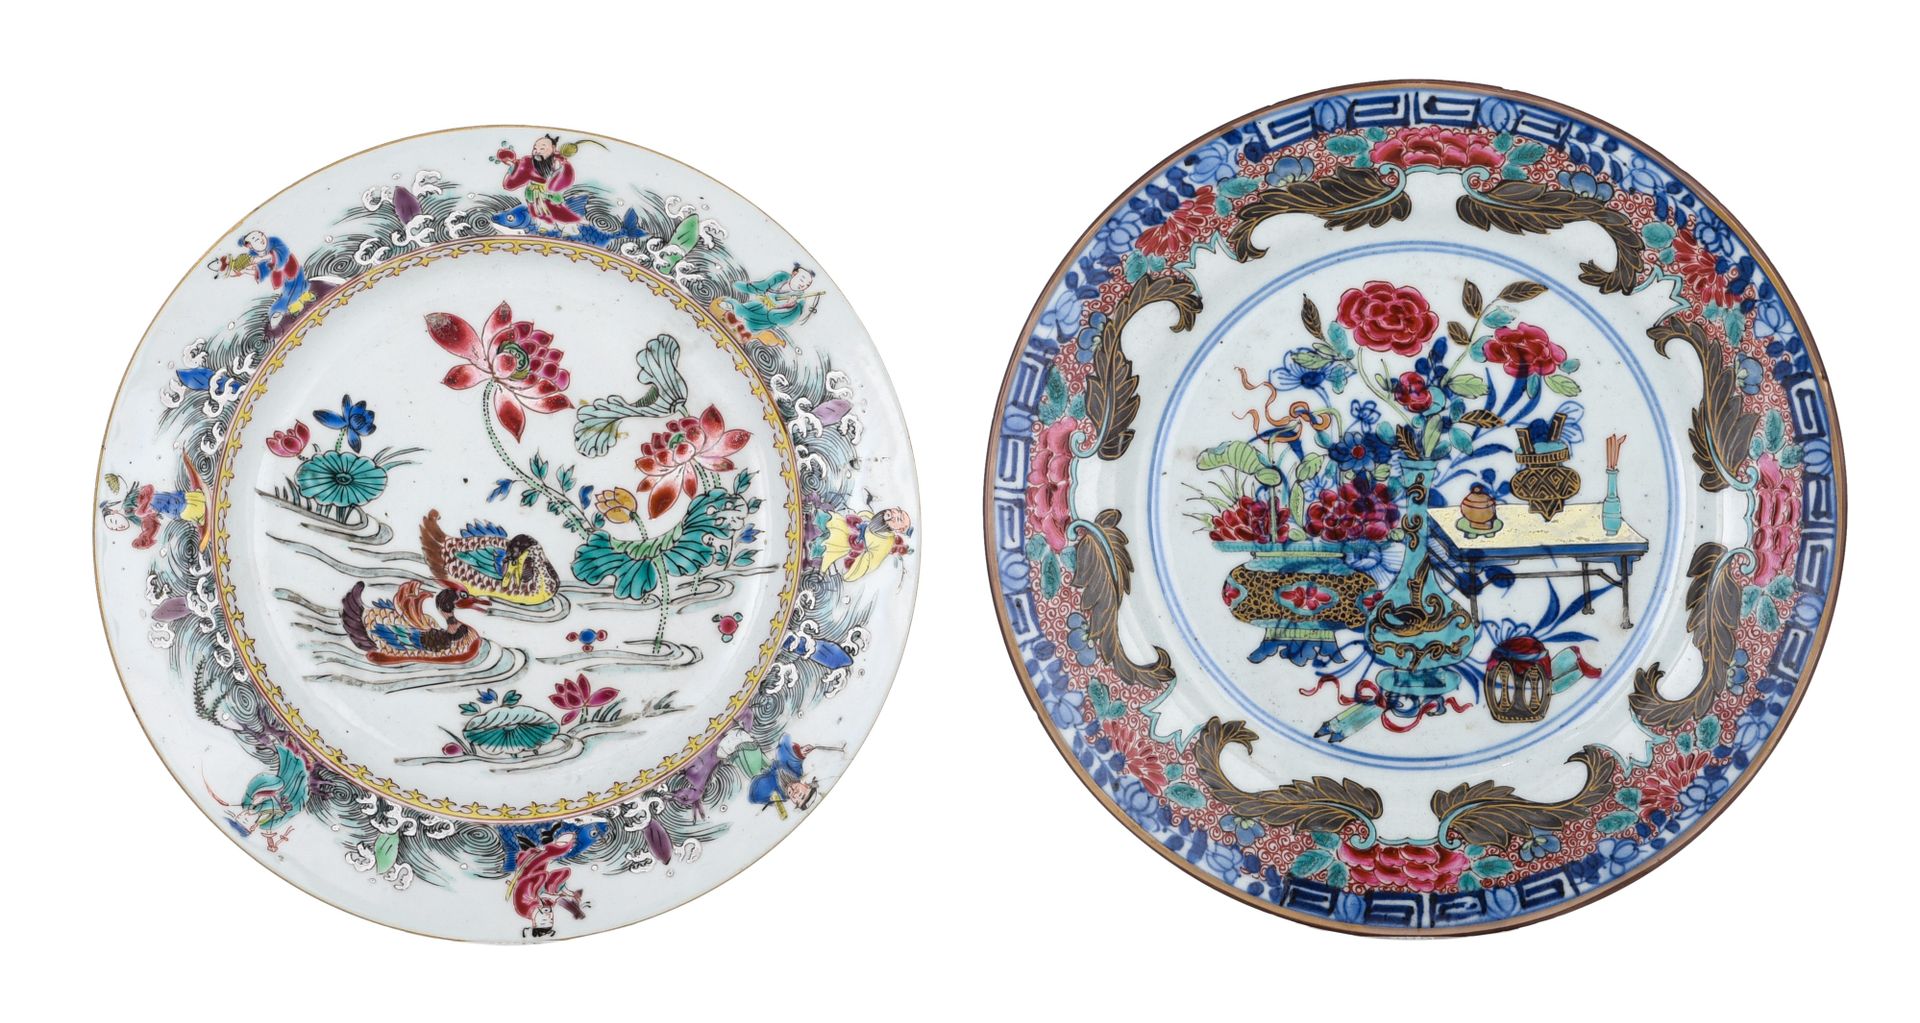 Two Chinese famille rose export porcelain dishes, 18thC, dia. 22,5 - 23,5 cm Deu&hellip;